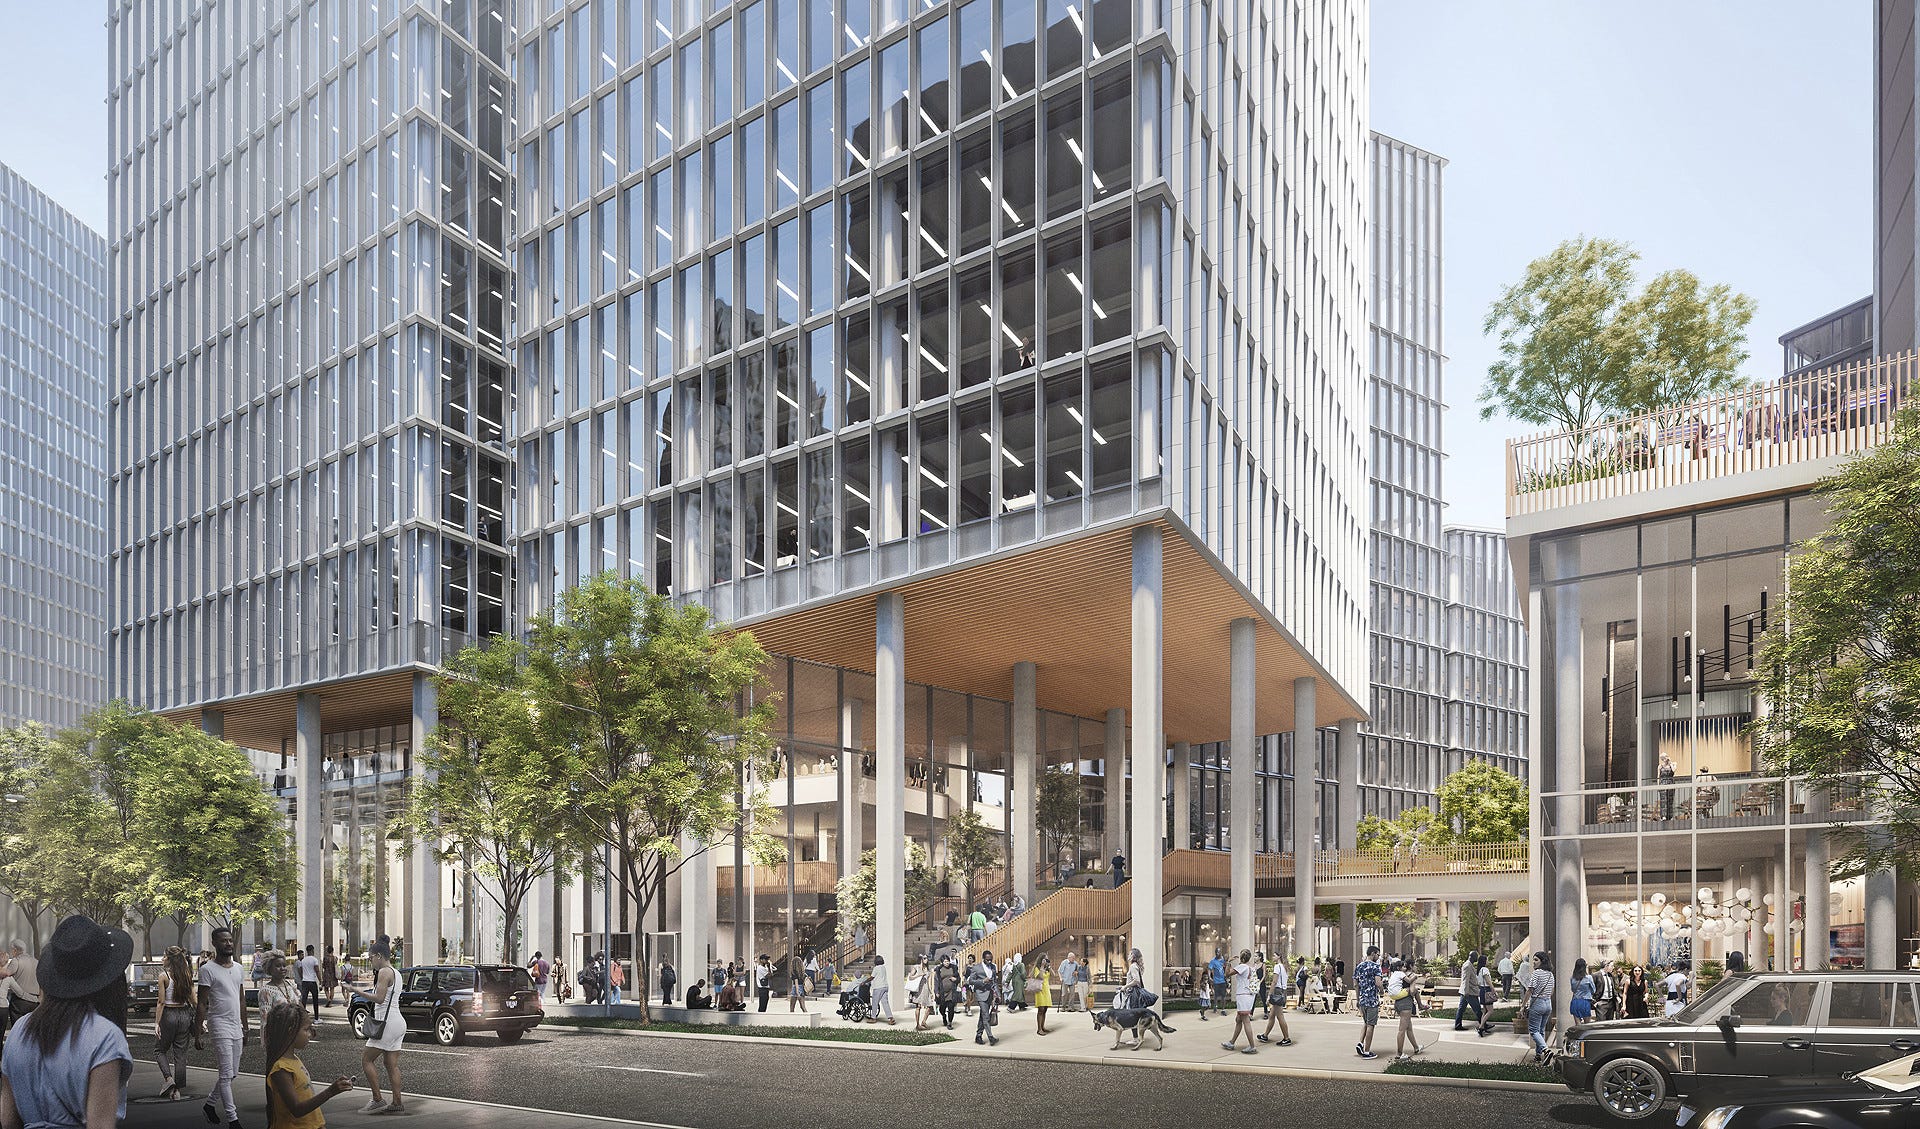 Plans for the Monroe Blocks project include the first high-rise office tower to be built downtown in a generation, as well as more than an acre of open space.